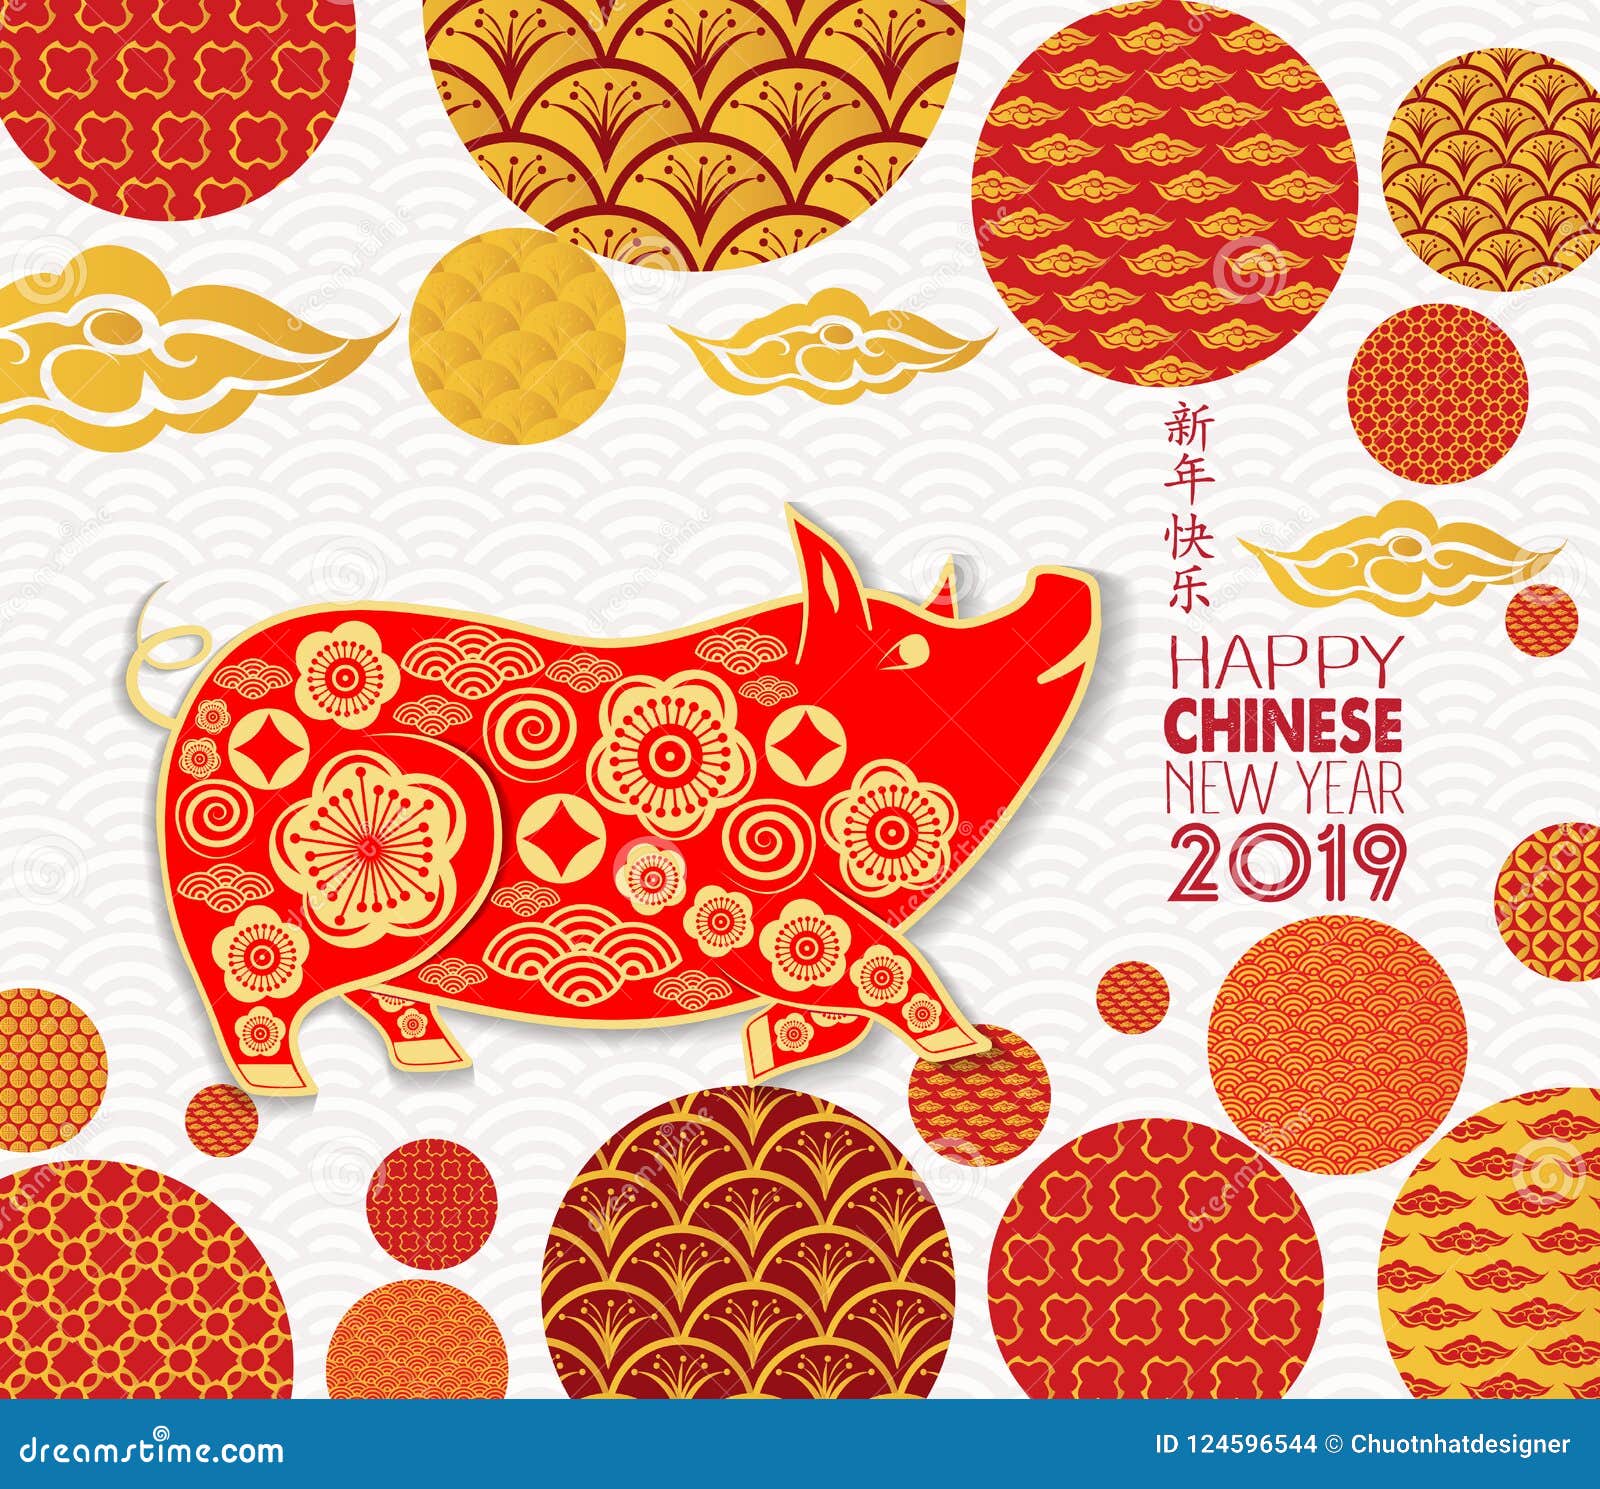 Happy New Year 2019 Template Greeting Card In Oriental Style